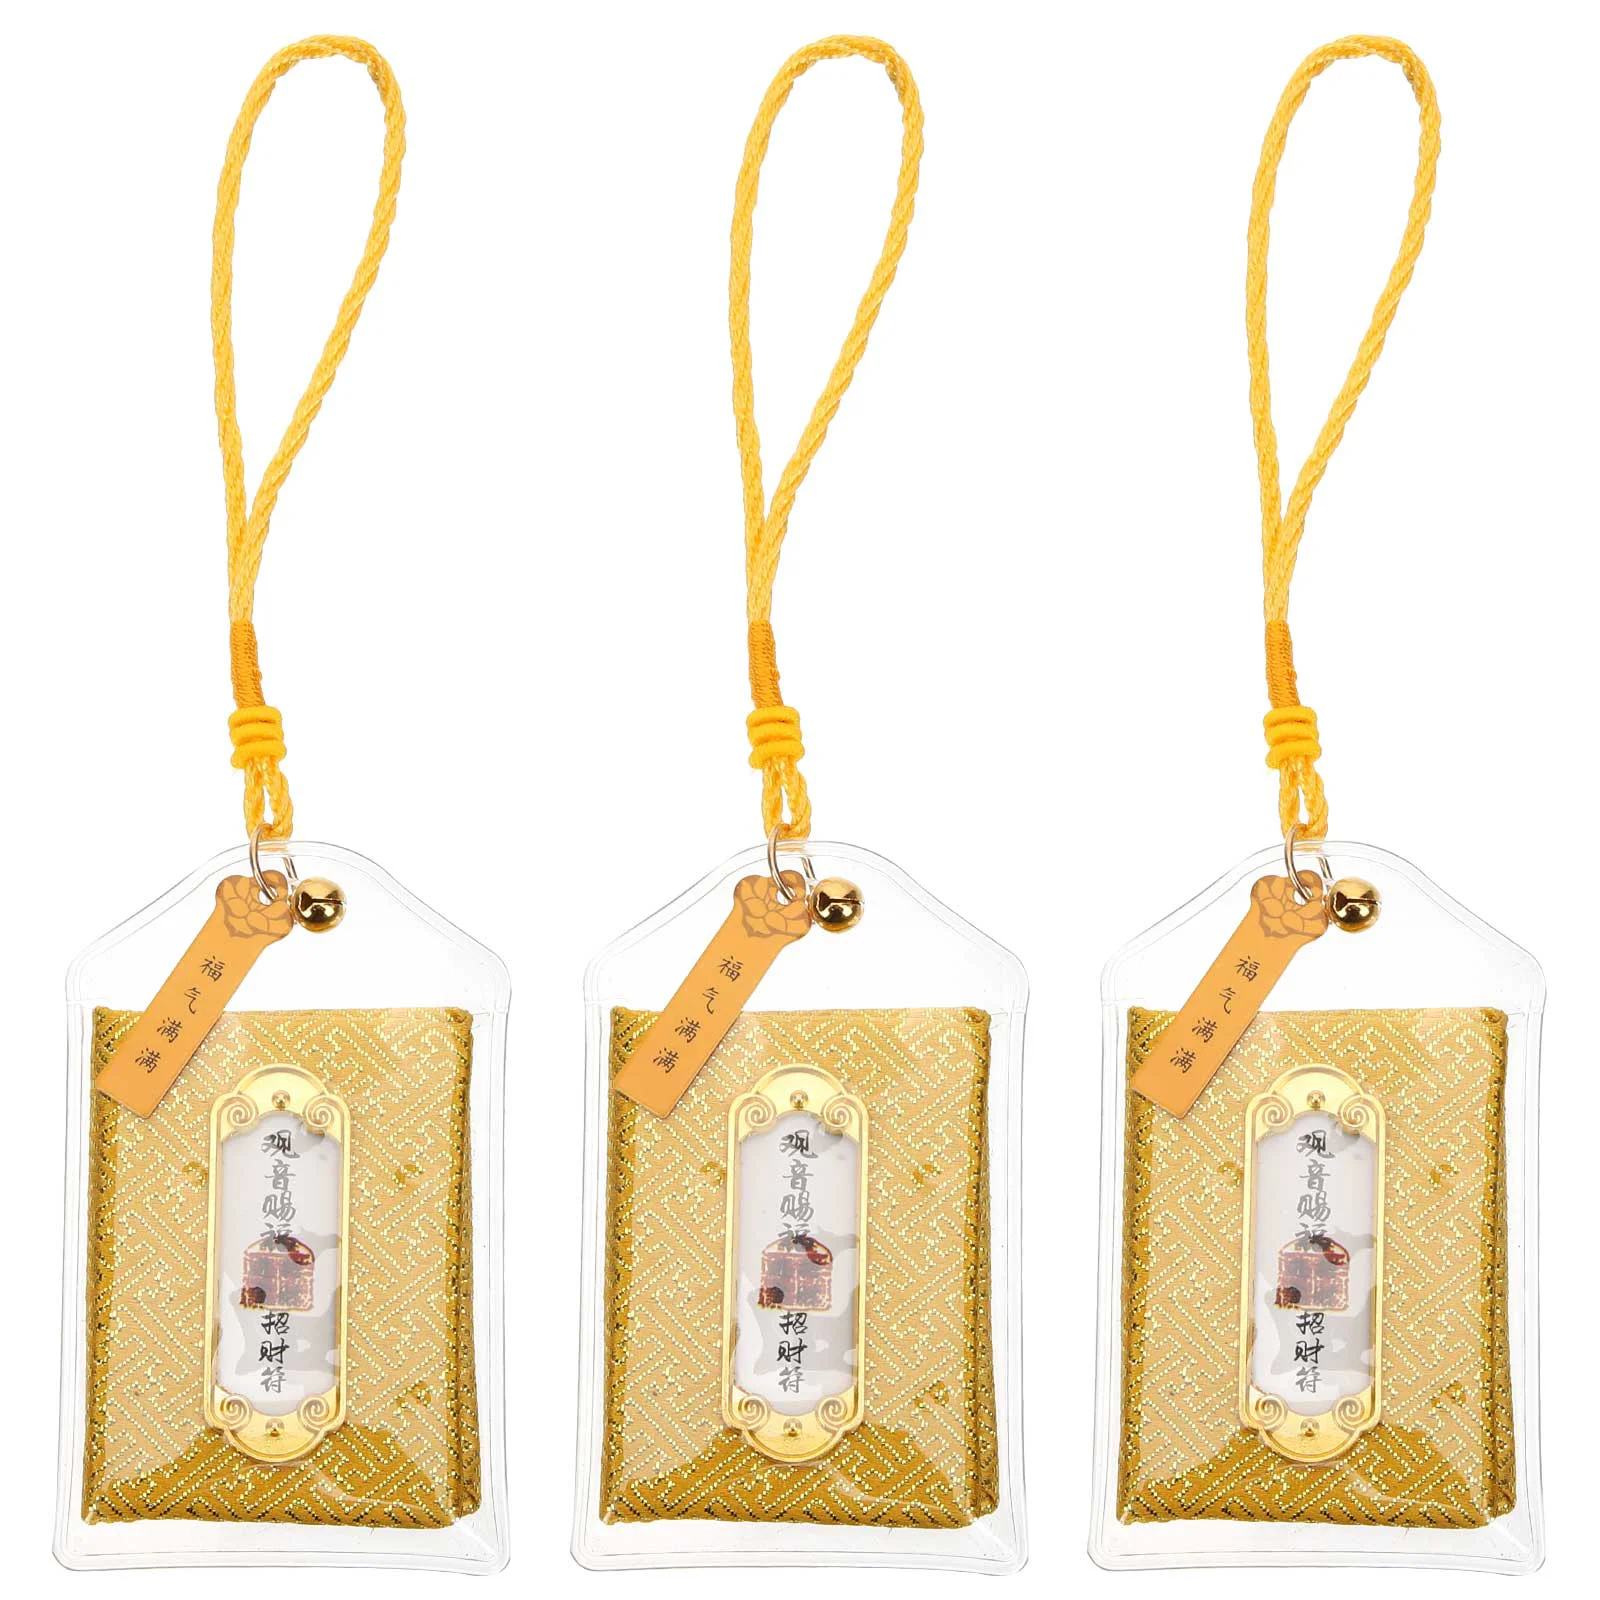 

Japanese Charm Amulet Luck Omamori Good Charms Blessing Car Fortune Pendant Japan Lucky Protection Sachet Cat Shrine Jewely